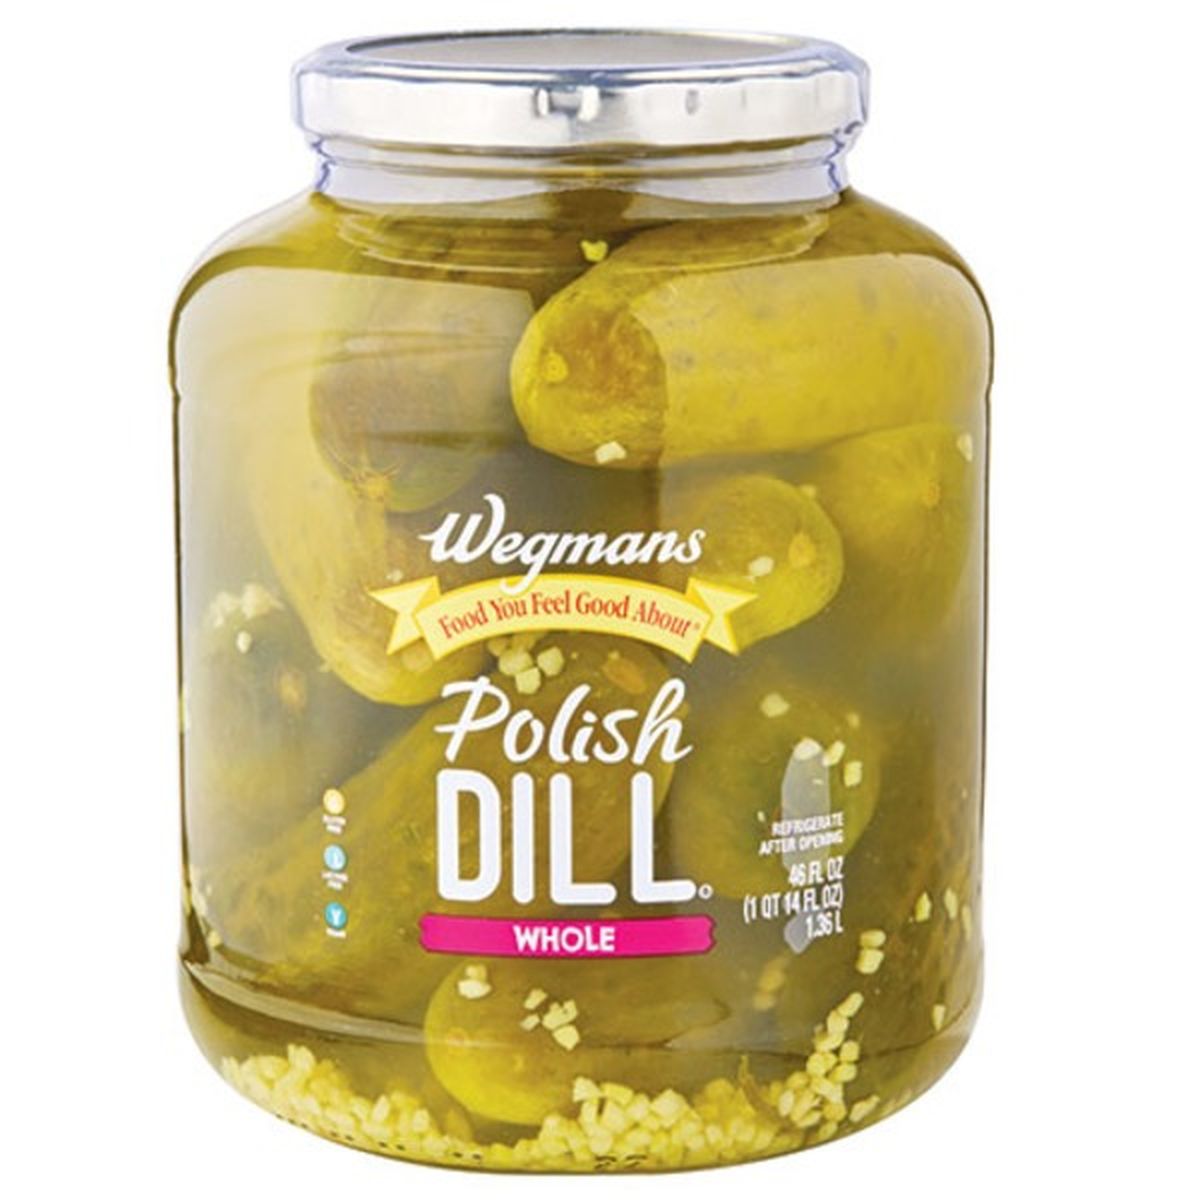 Calories in Wegmans Whole Polish Dill Pickles